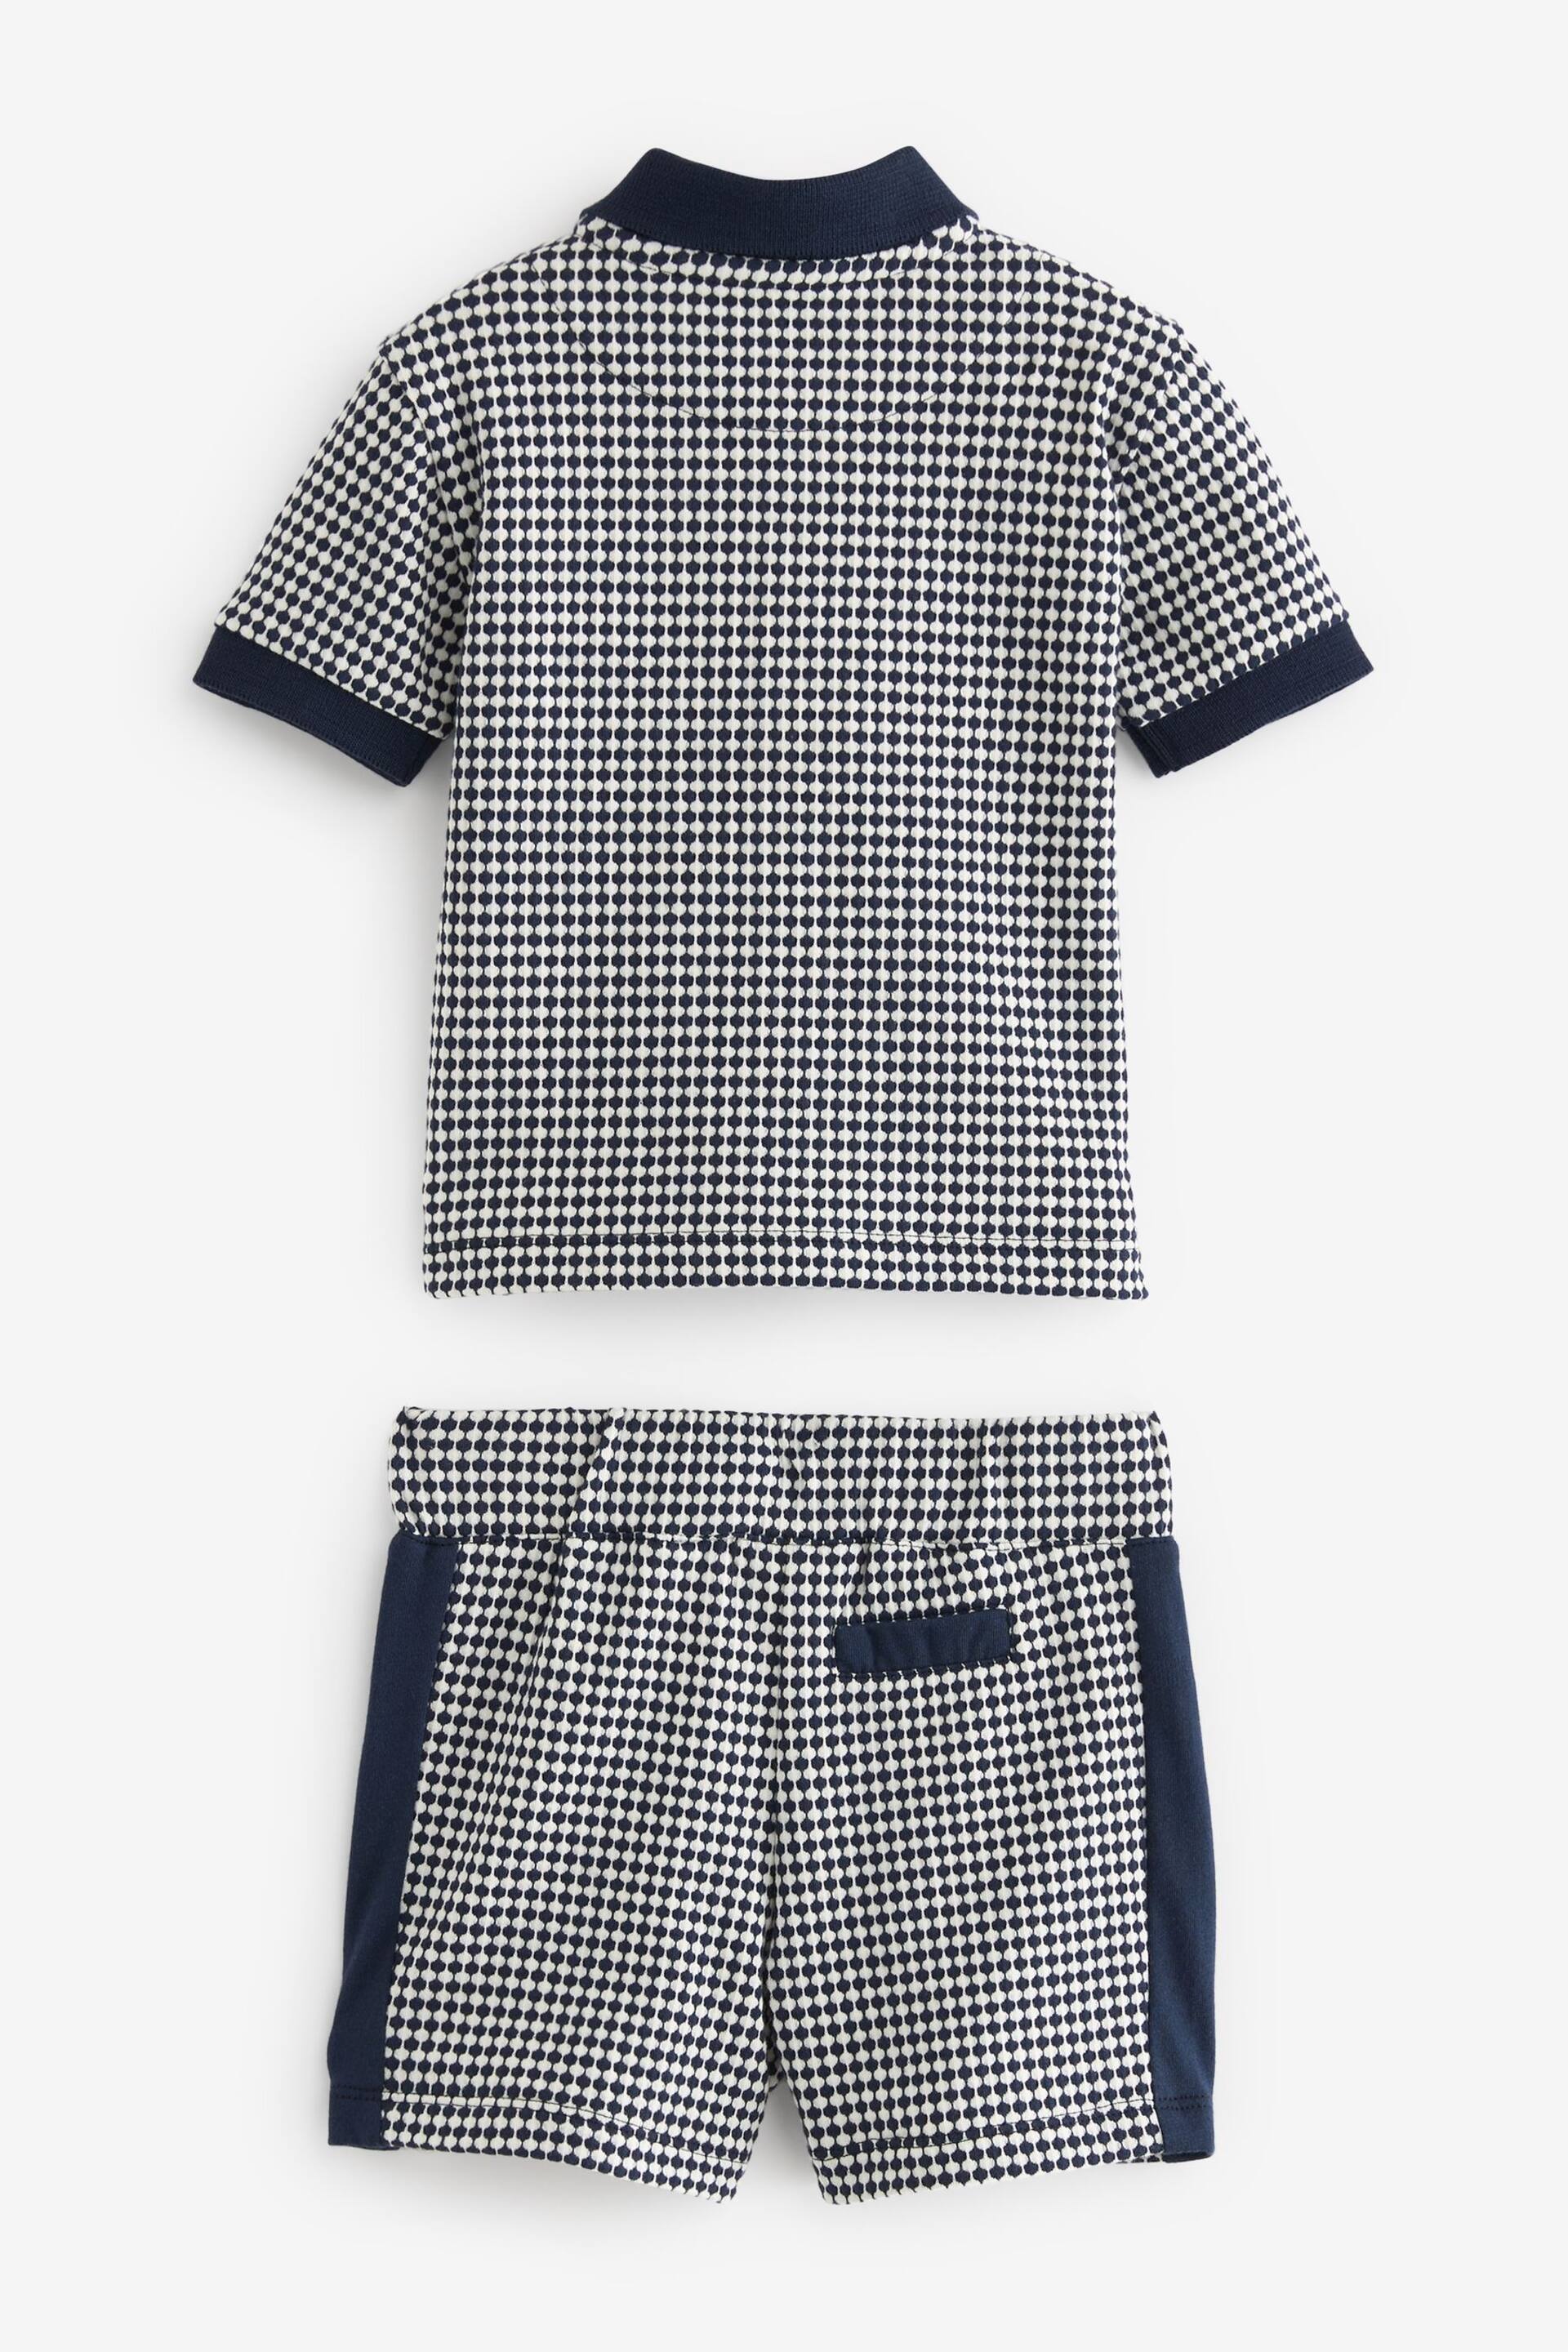 Baker by Ted Baker Textured Polo Shirt and Short Set - Image 8 of 10